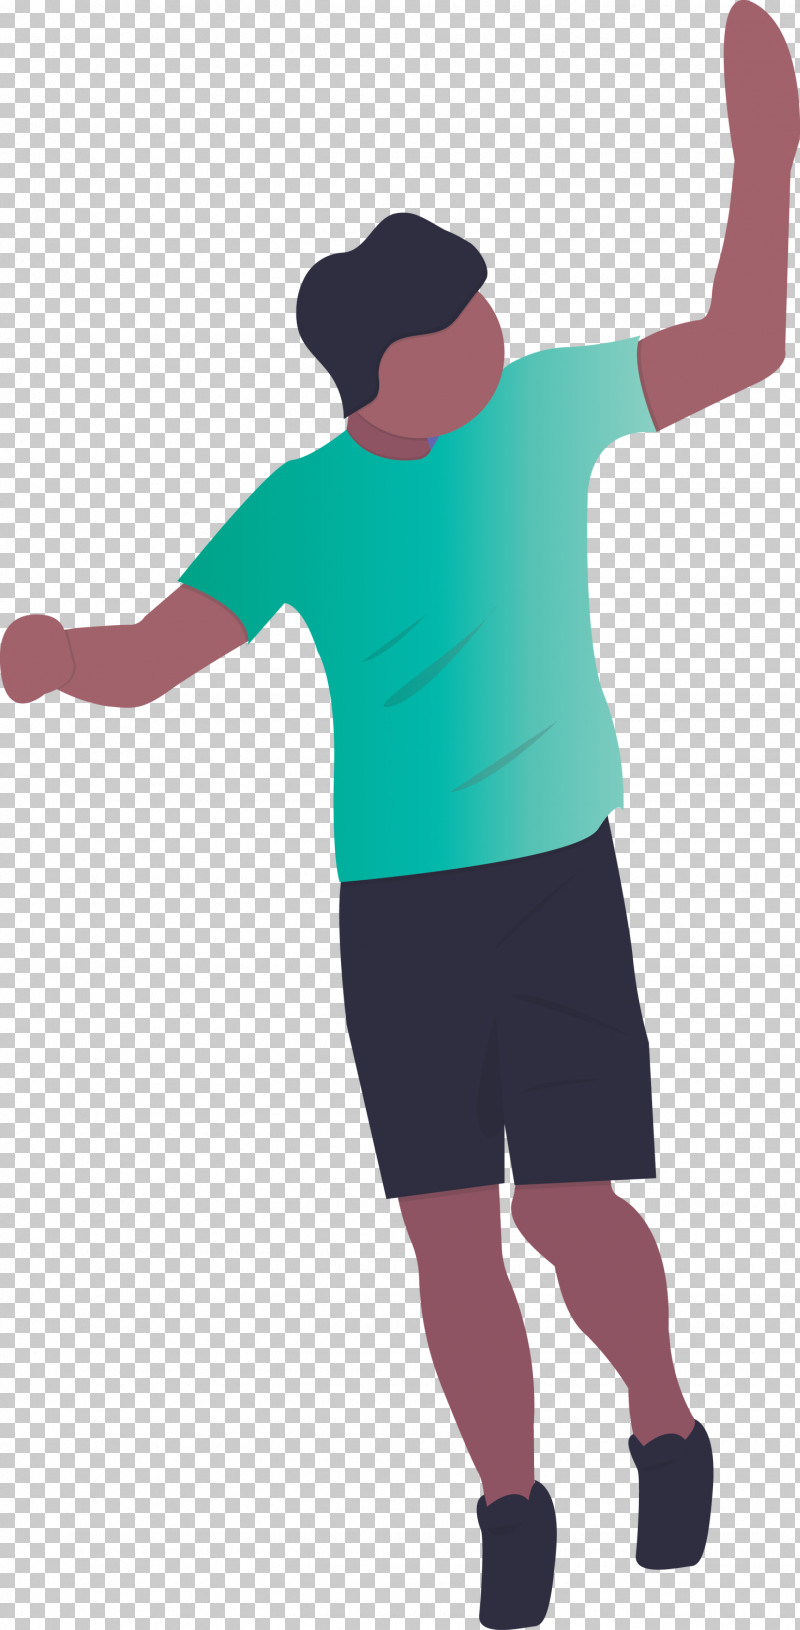 Standing Arm Joint Sleeve Gesture PNG, Clipart, Arm, Child, Gesture, Joint, Sleeve Free PNG Download